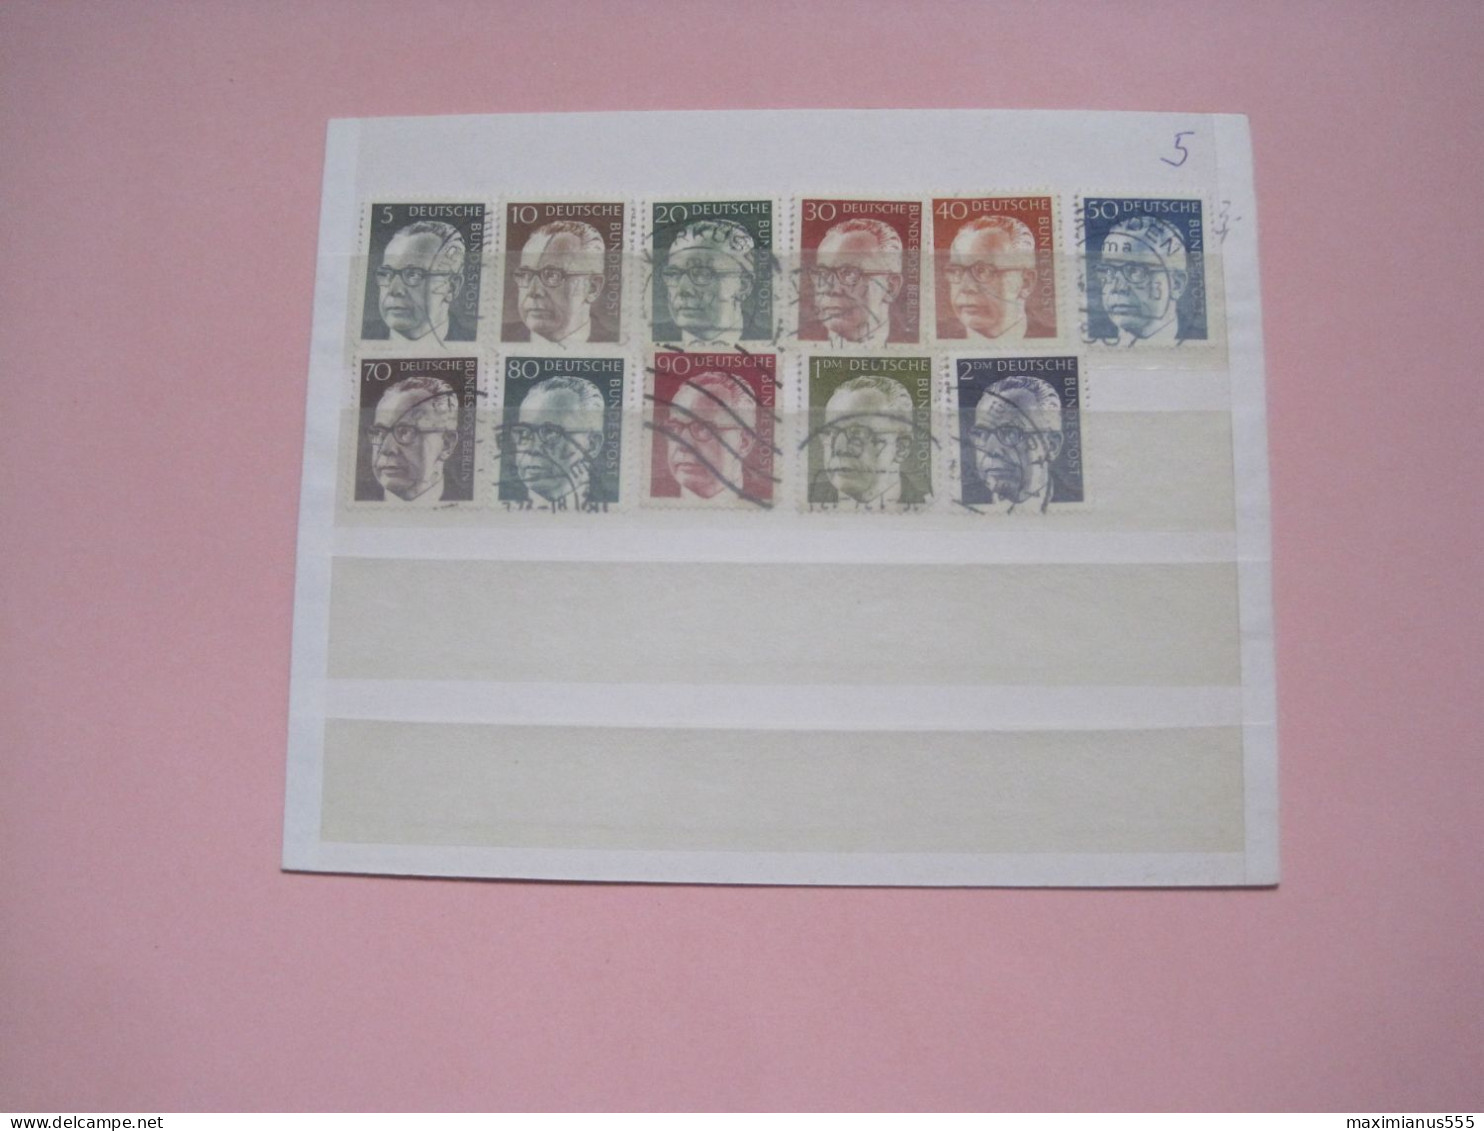 Germany Bundespost Satz. (11W.) 1970/71, Michel 2022, 50% Off Price (5) - Used Stamps